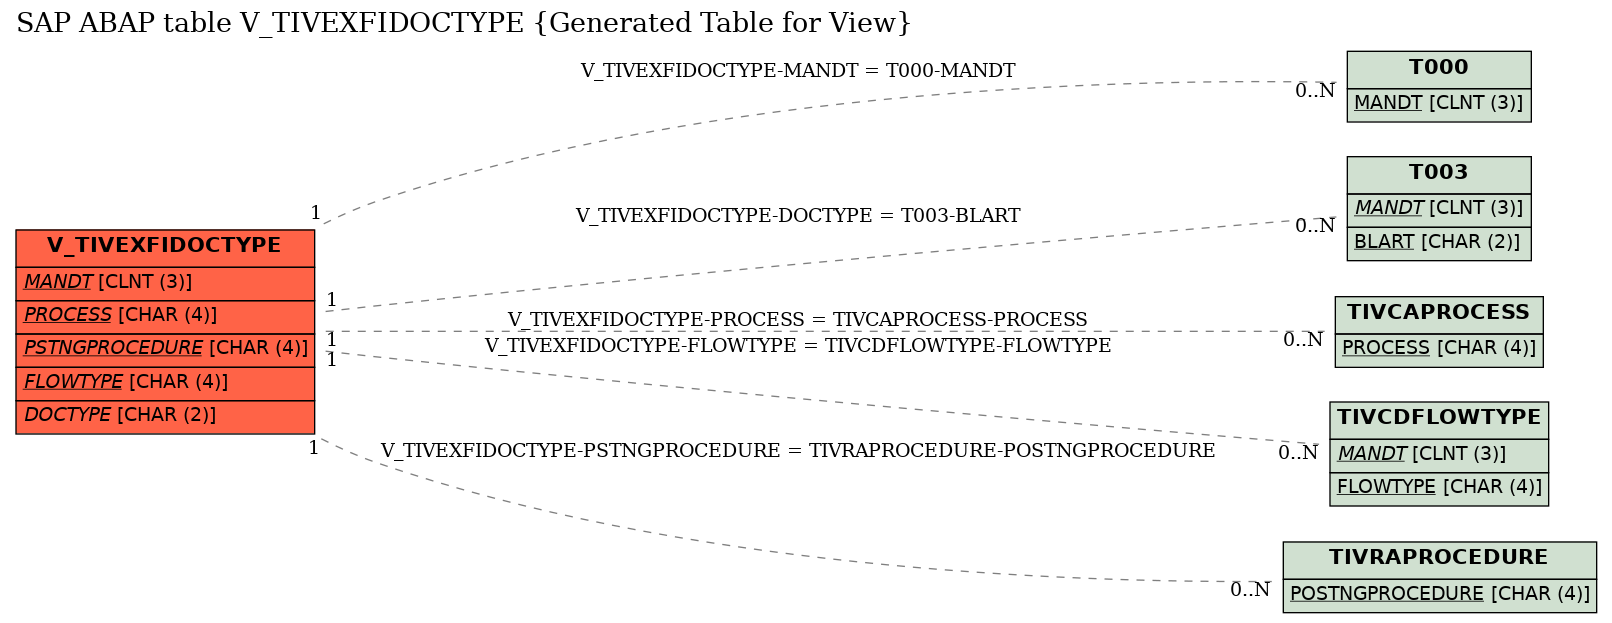 E-R Diagram for table V_TIVEXFIDOCTYPE (Generated Table for View)